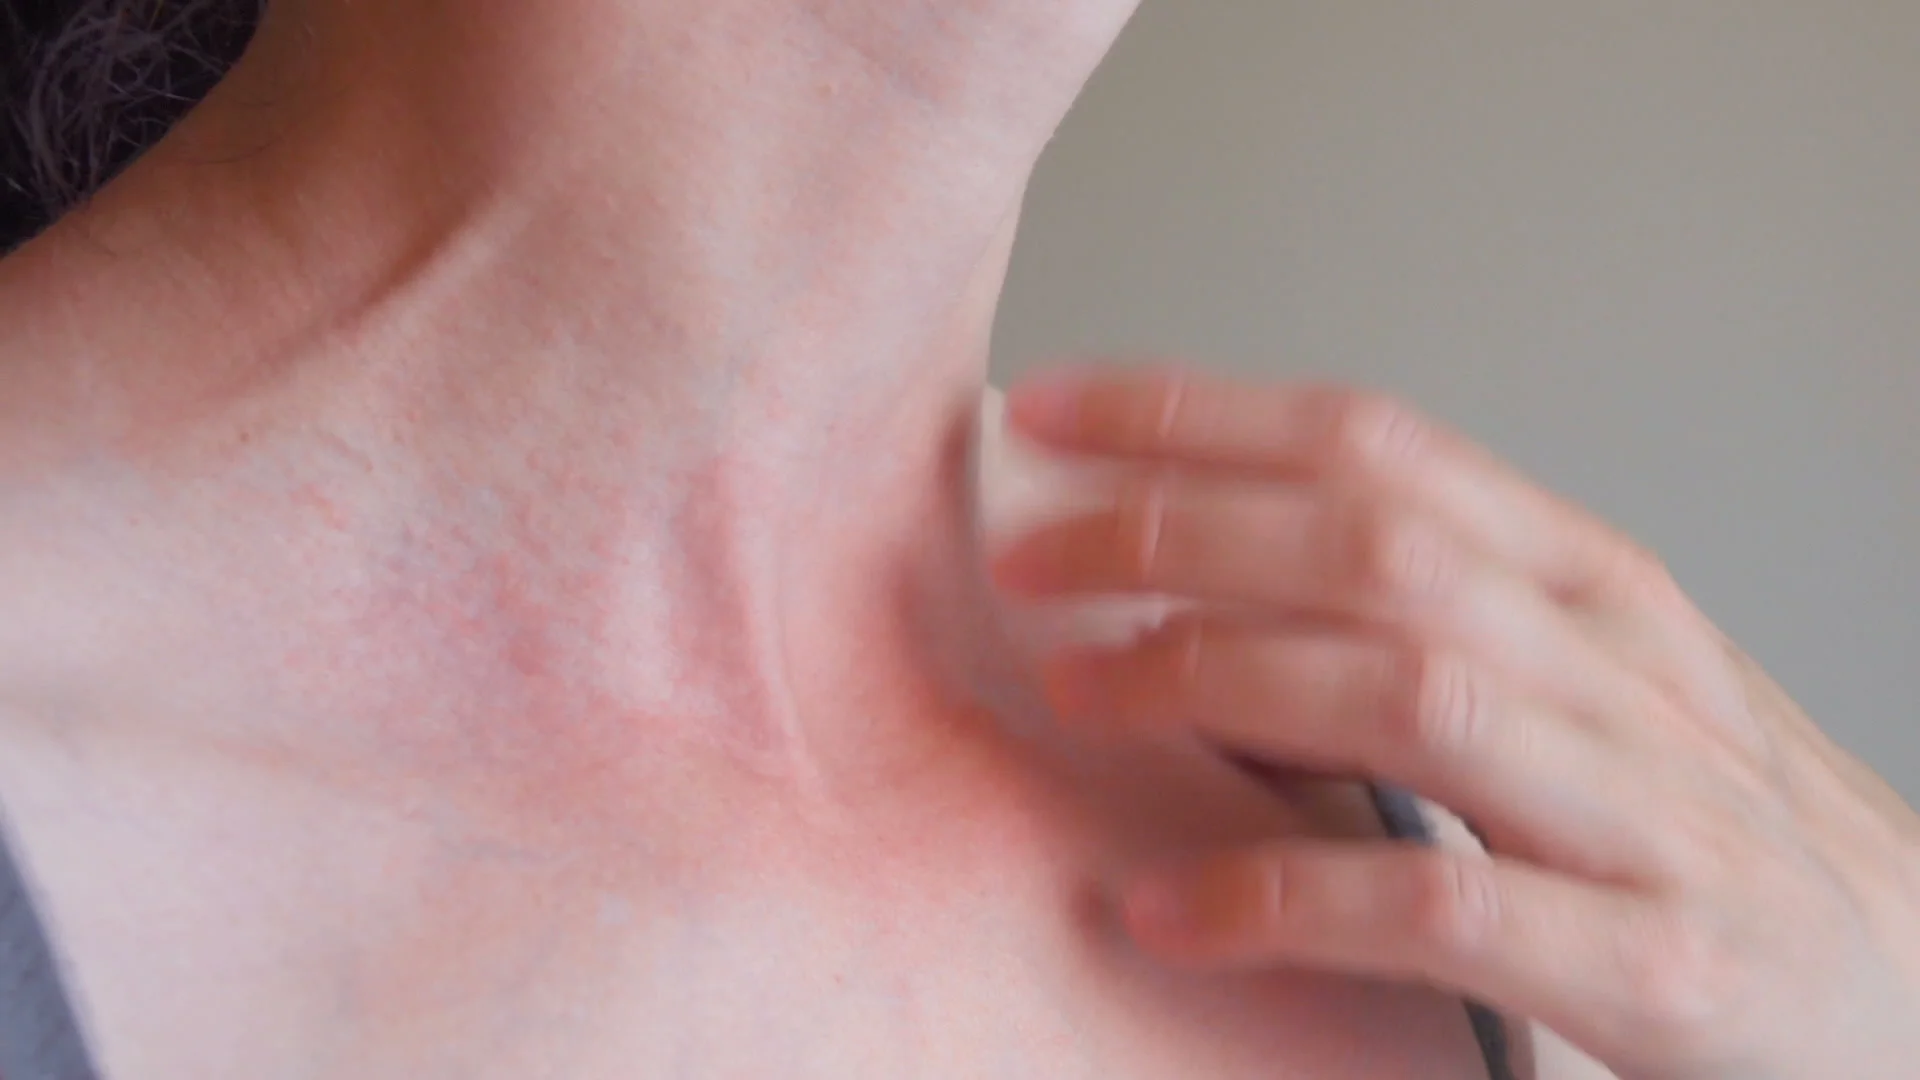 Can You Get A Skin Rash From Stress? - Scripps Health